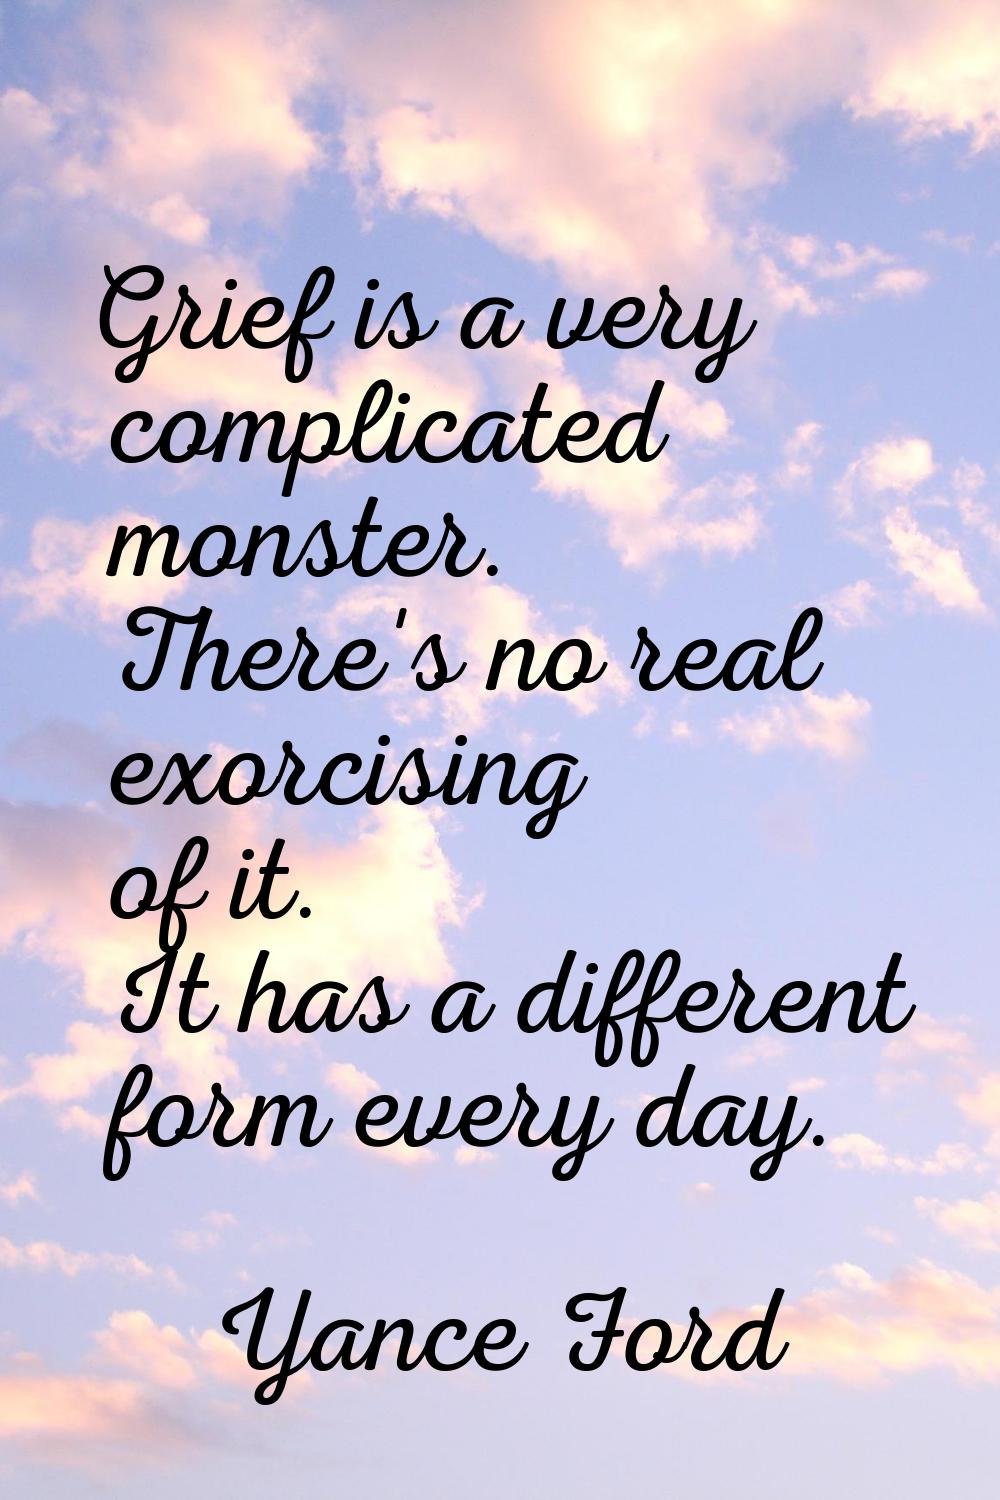 Grief is a very complicated monster. There's no real exorcising of it. It has a different form ever